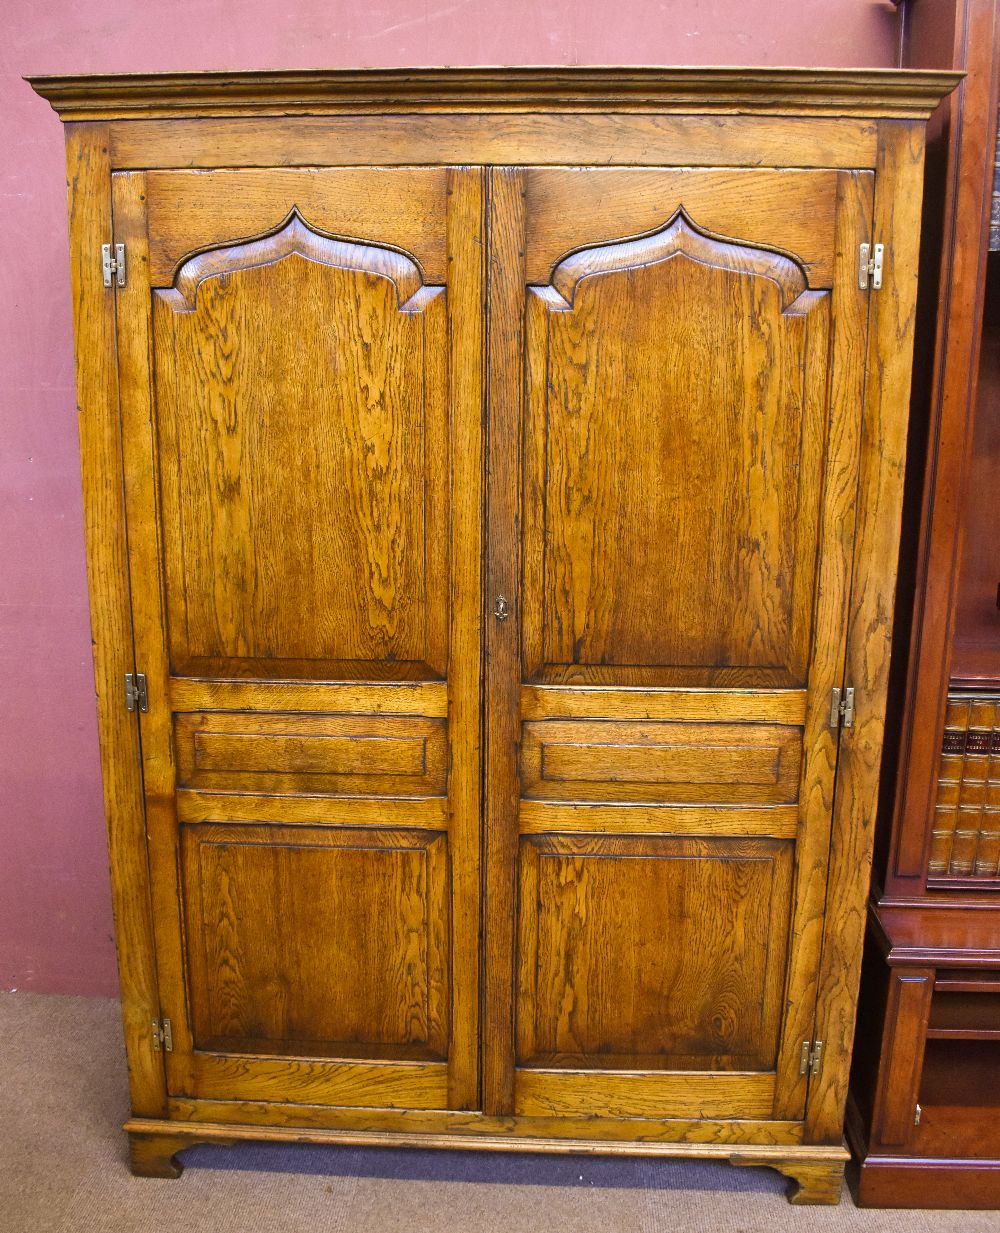 A good quality reproduction oak cupboard, probably by Titchmarsh & Goodwin, with pair of panel doors